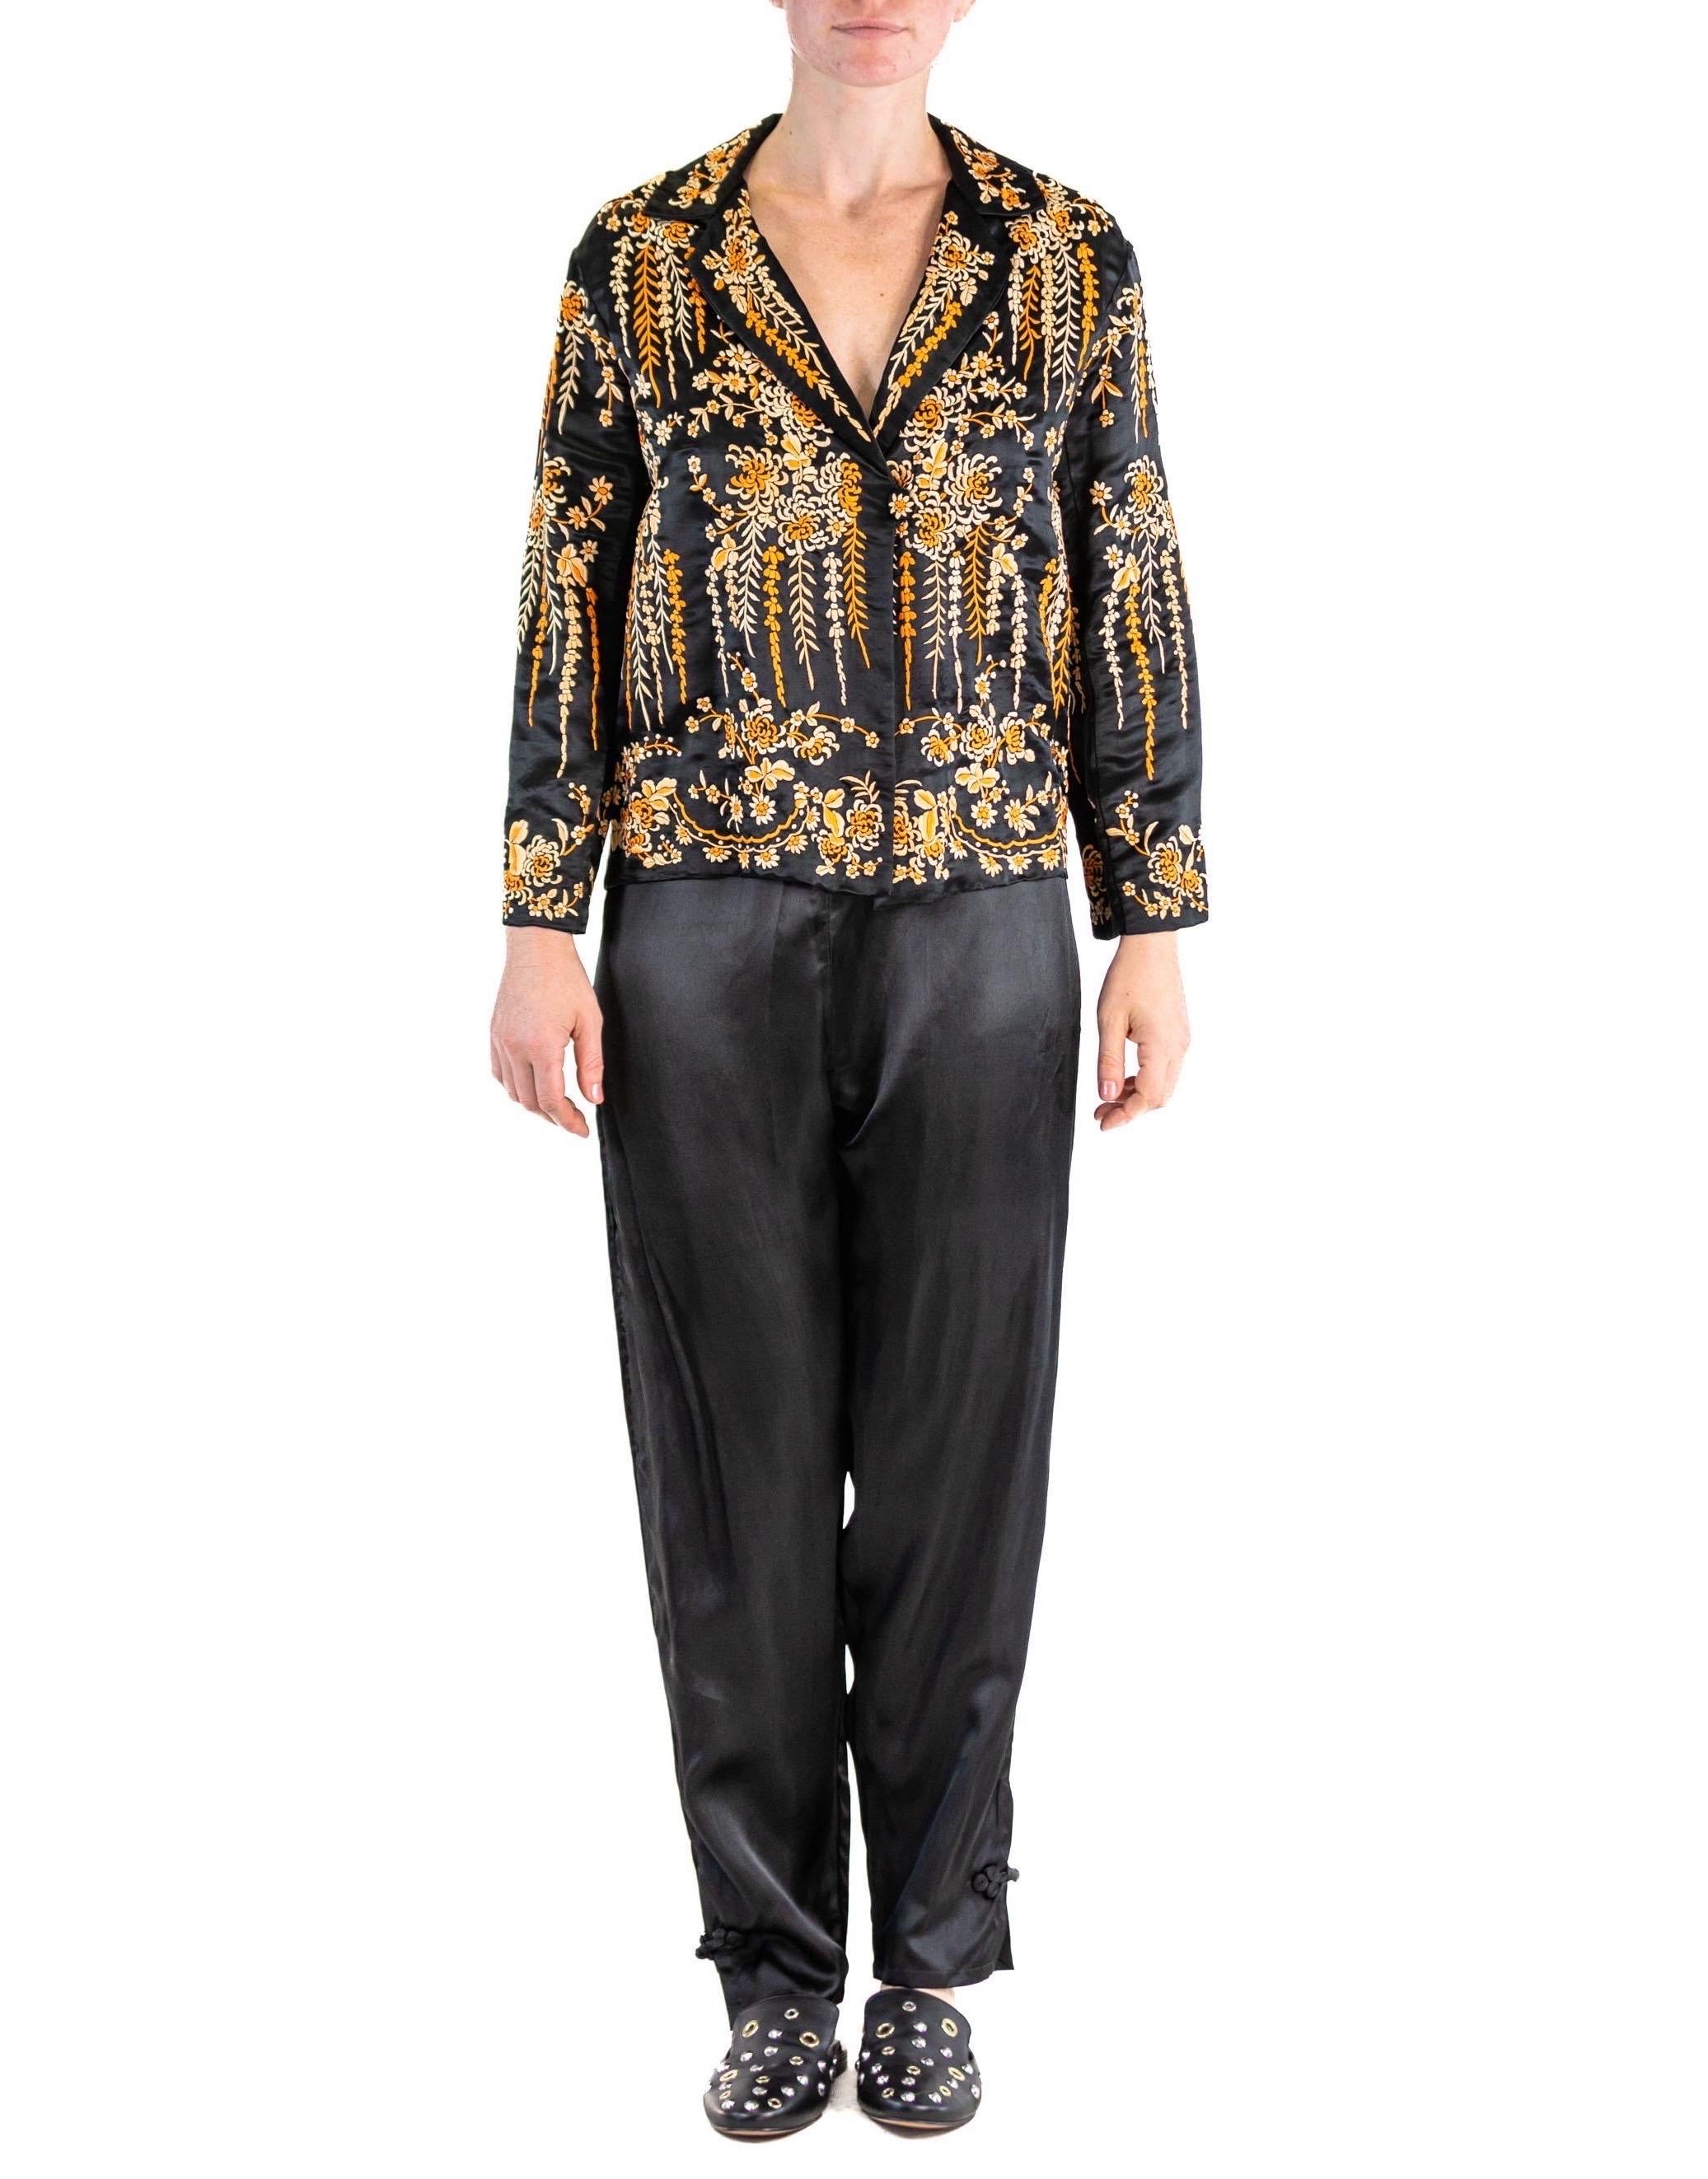 Elastic in the waist. Lot's of stretch.  Black & Orange Silk Satin Hand Embroidered Lounge Pajamas 